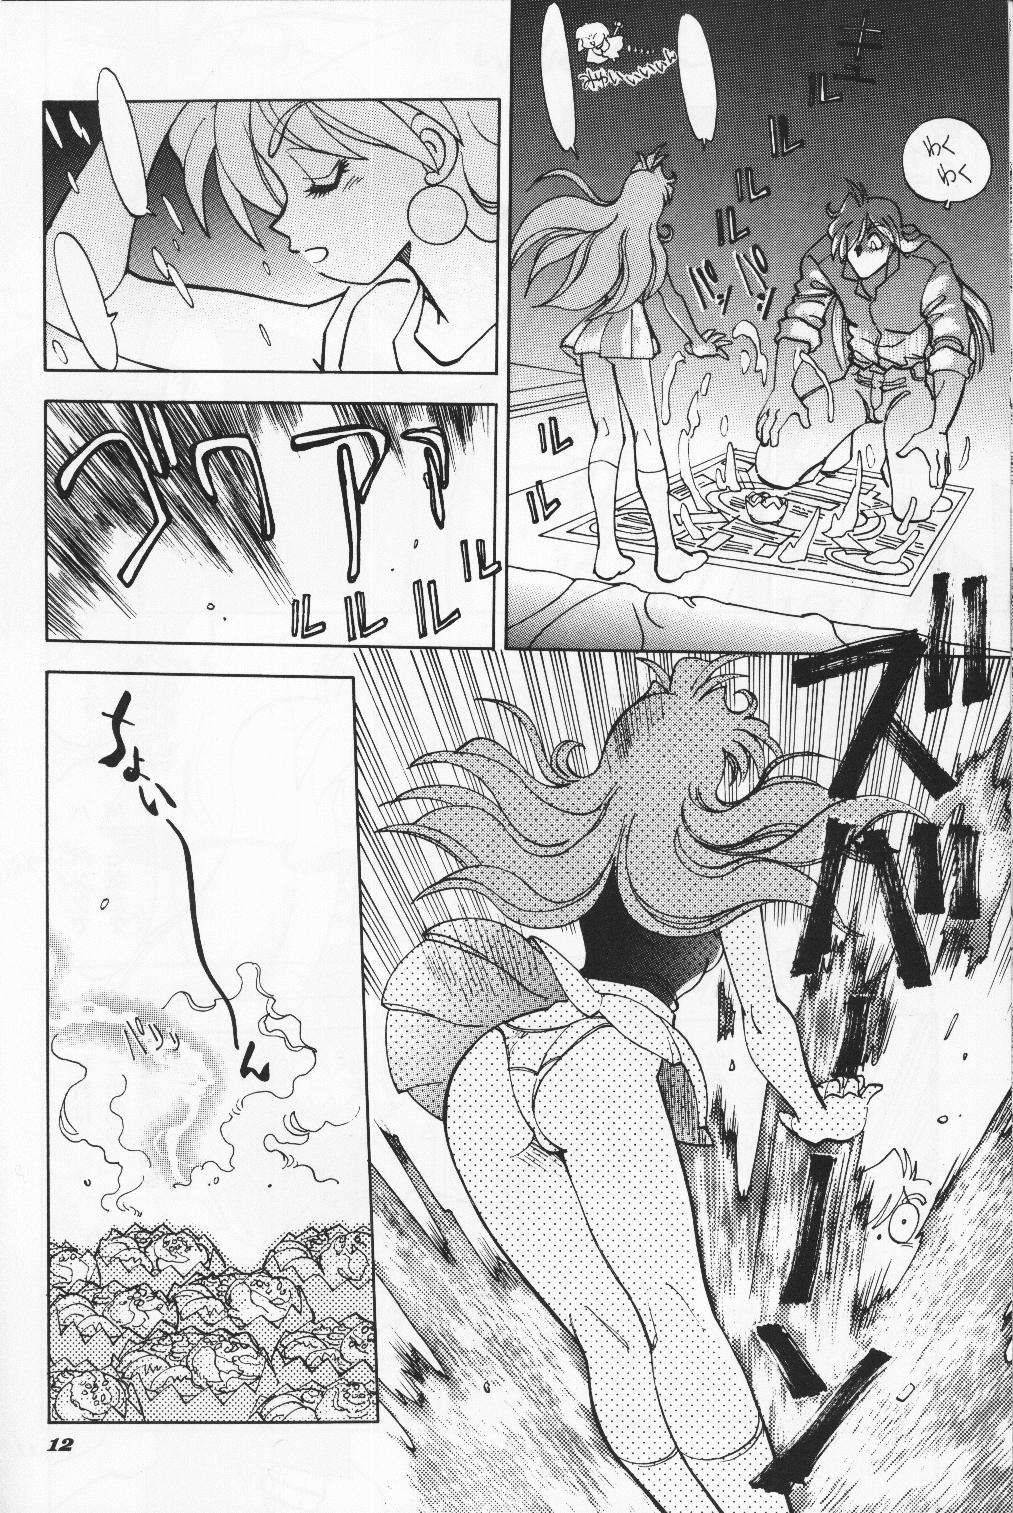 Tanned Mantou 19 - Slayers Casal - Page 12